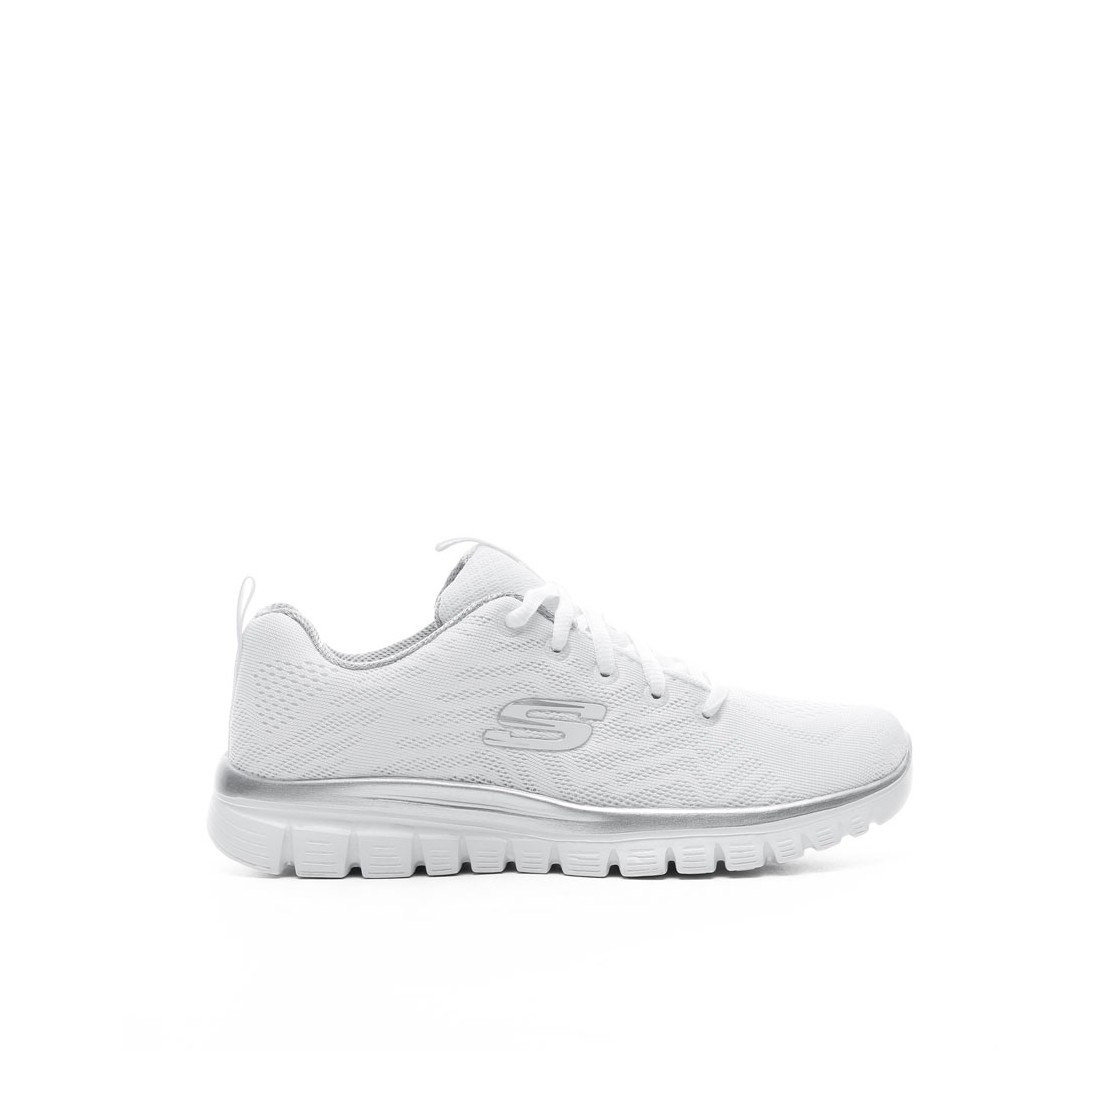 SKECHERS SCARPE RUNNING W DONNA GRACEFUL GET CONNECTED BIANCHE